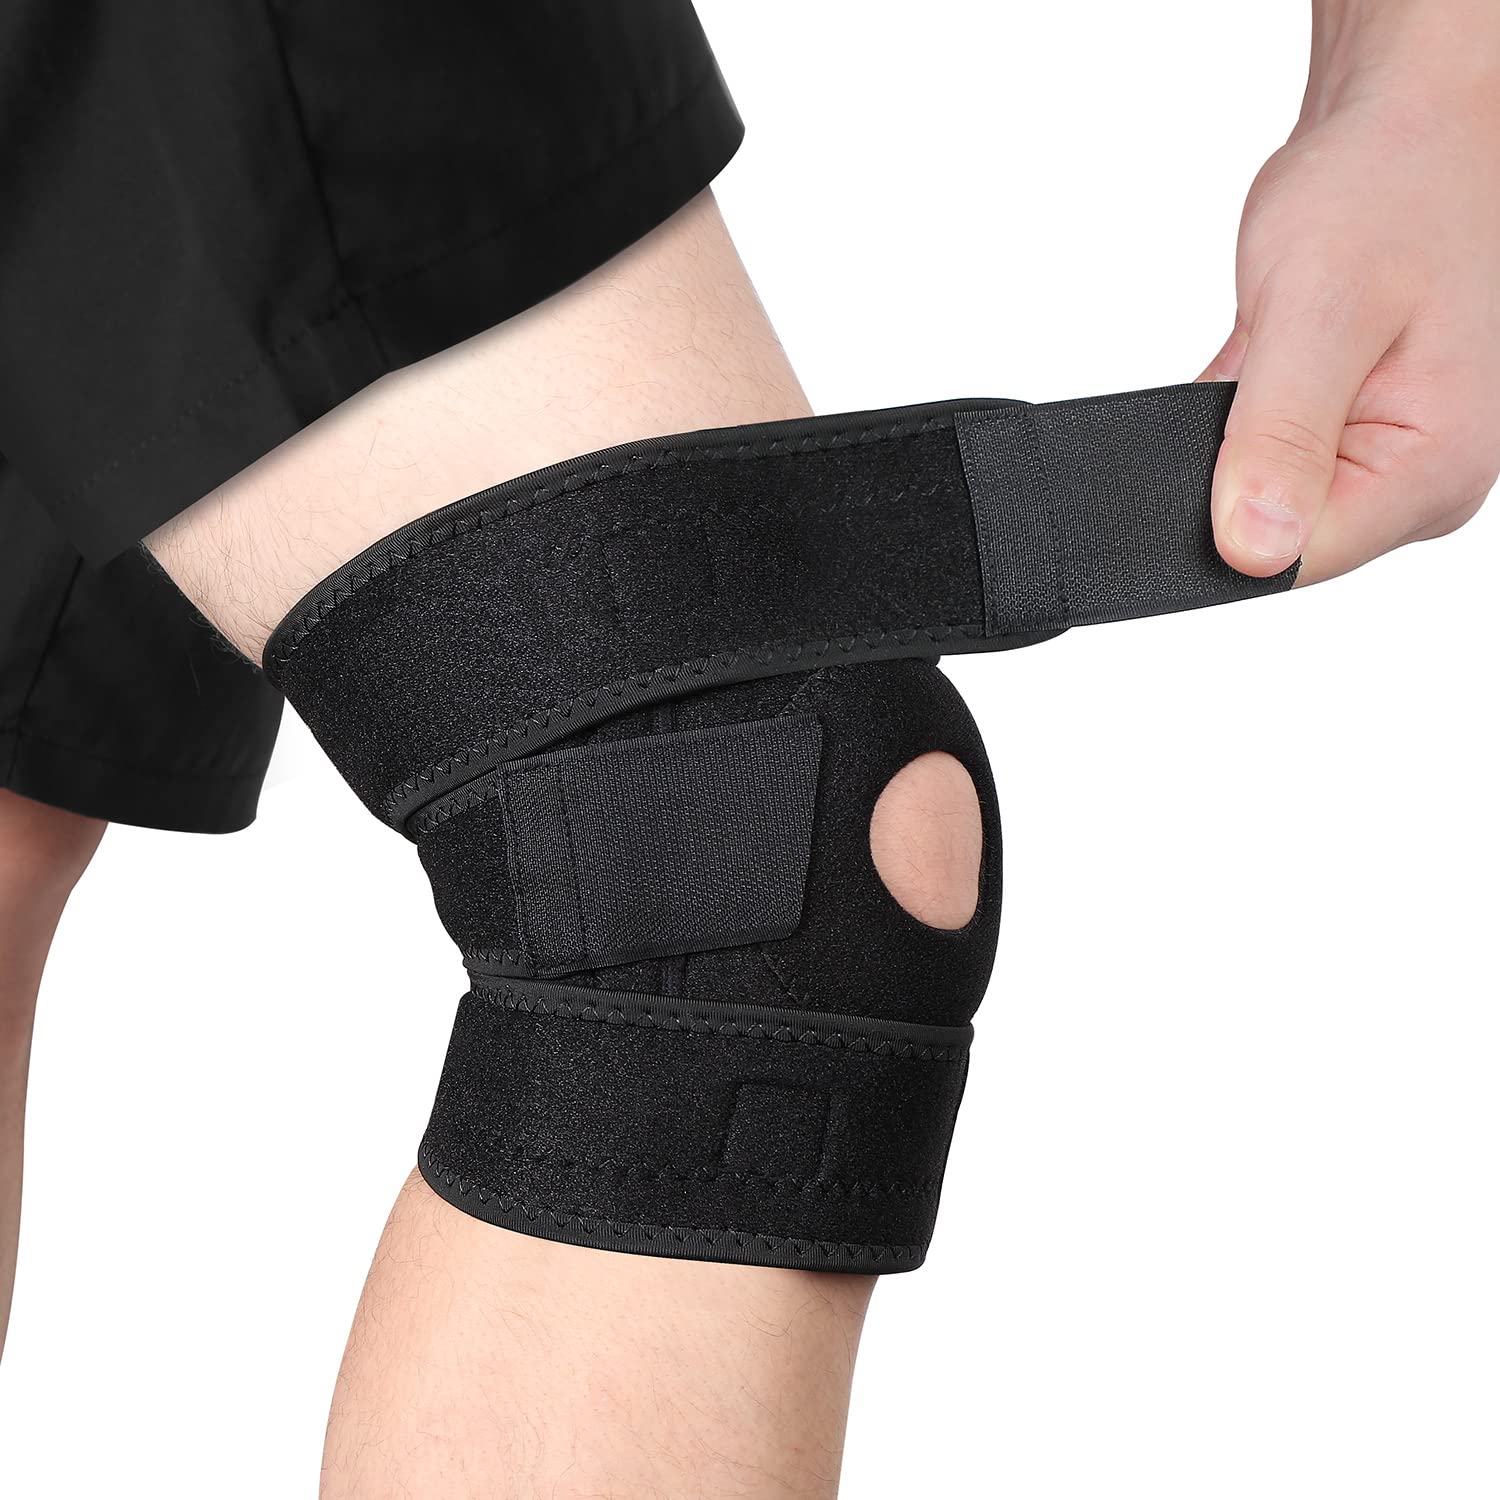 Body Care Velcro Knee Brace with Adjustable Straps, Breathable Material &  Reinforced Stitching for Support